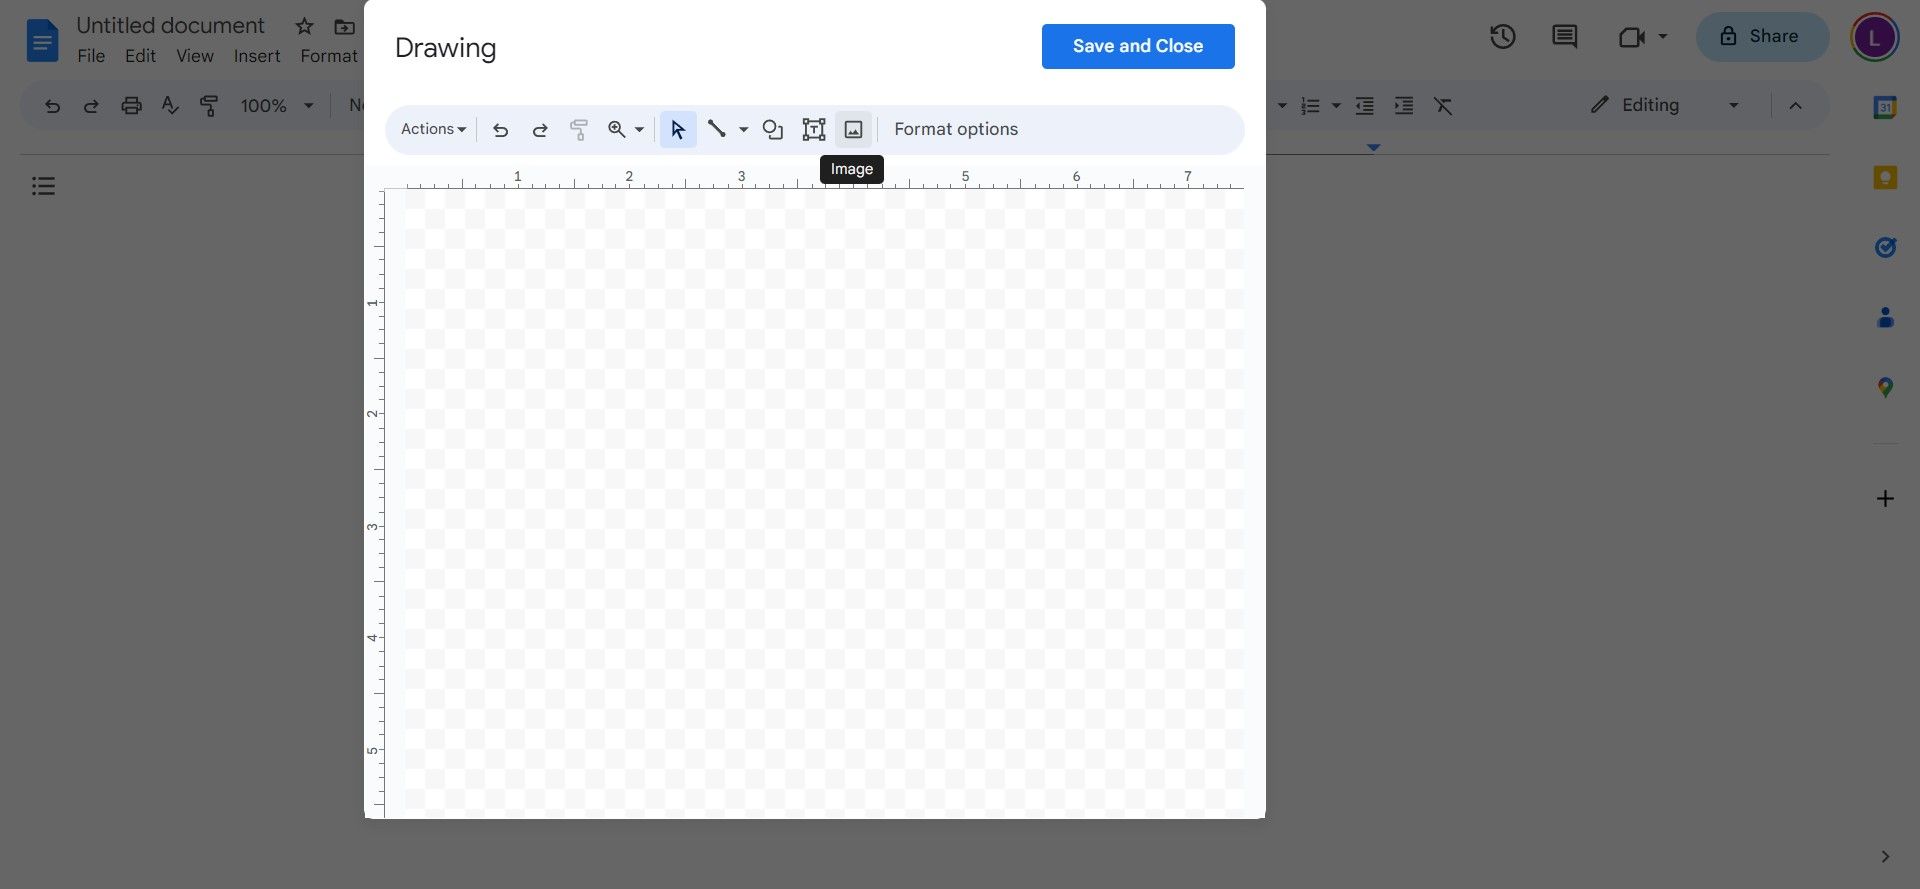 Screenshot shows the insert drawing popup in Google Docs with the image icon highlighted.